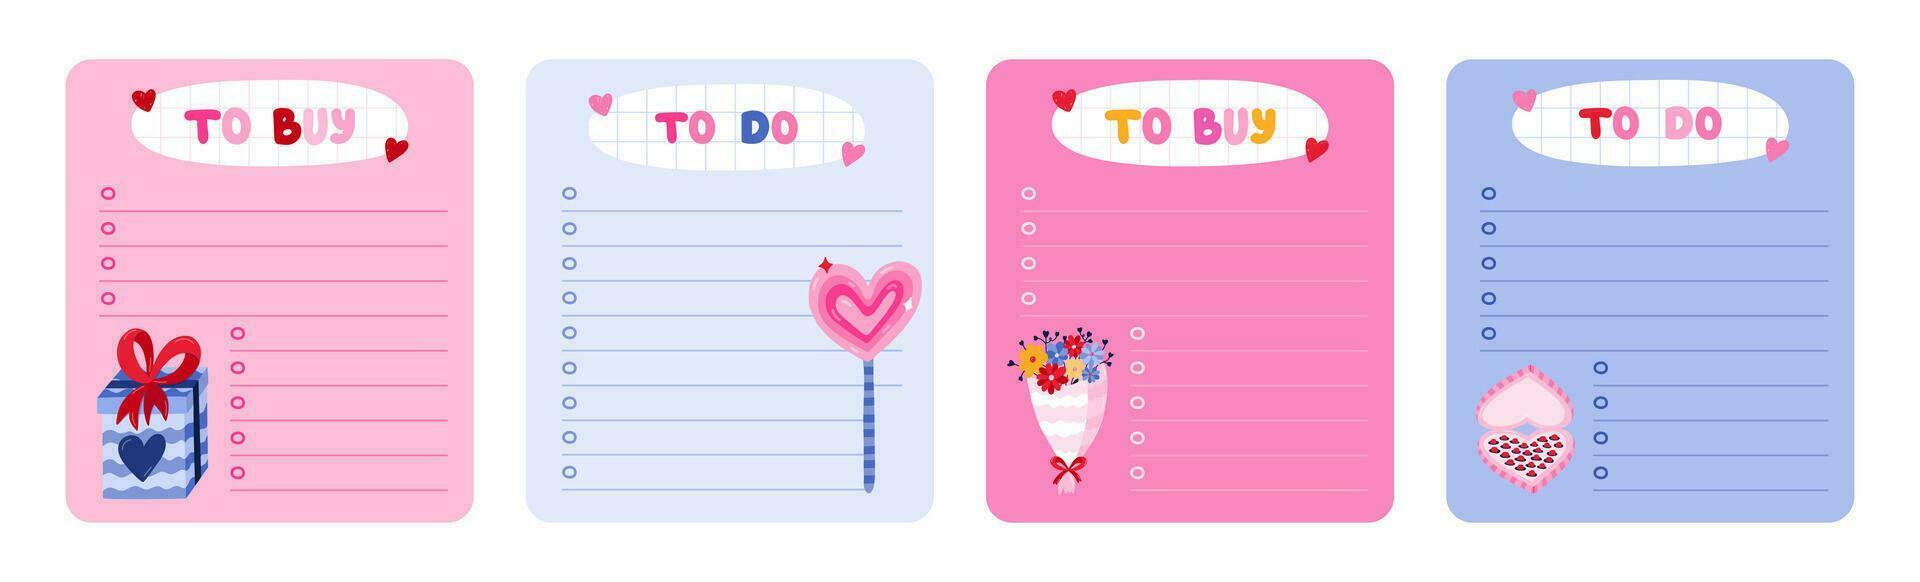 Set of cute scrapbook templates for planner - notes, to do, to buy, to read with illustrations about love, Valentine's day. With printable, editable illustrations. For school and university schedule vector